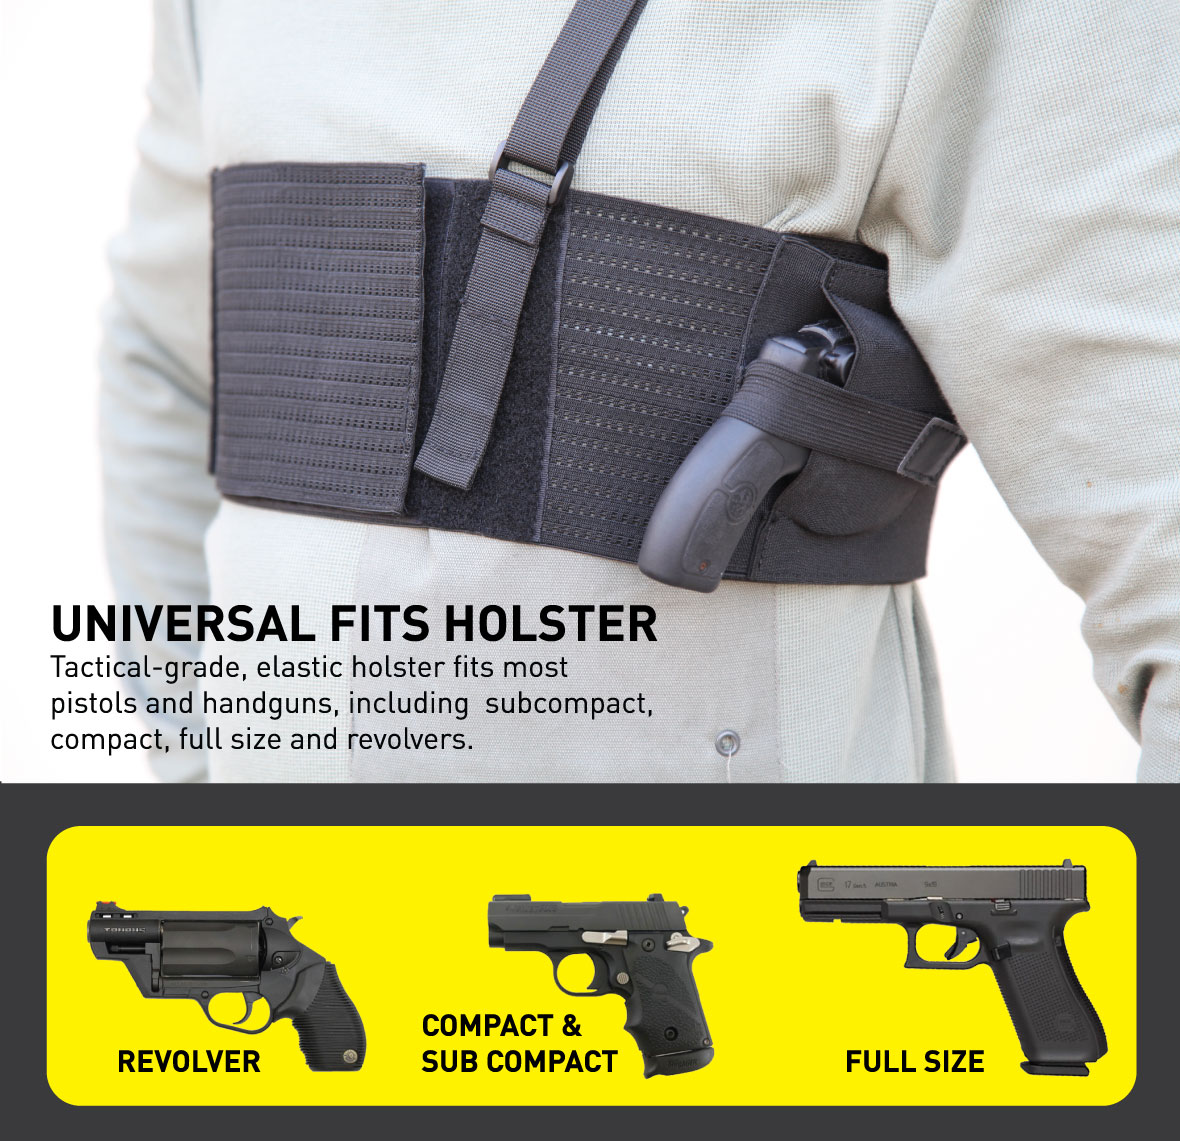 Stinger Premium Ultra Breathable Chest Band Holster for Concealed Carry, IWB OWB Gun Holster, Fabric Comfortable Waistband Handgun Holster, Ammo Bandolier for Extra Round of Revolver Bullet